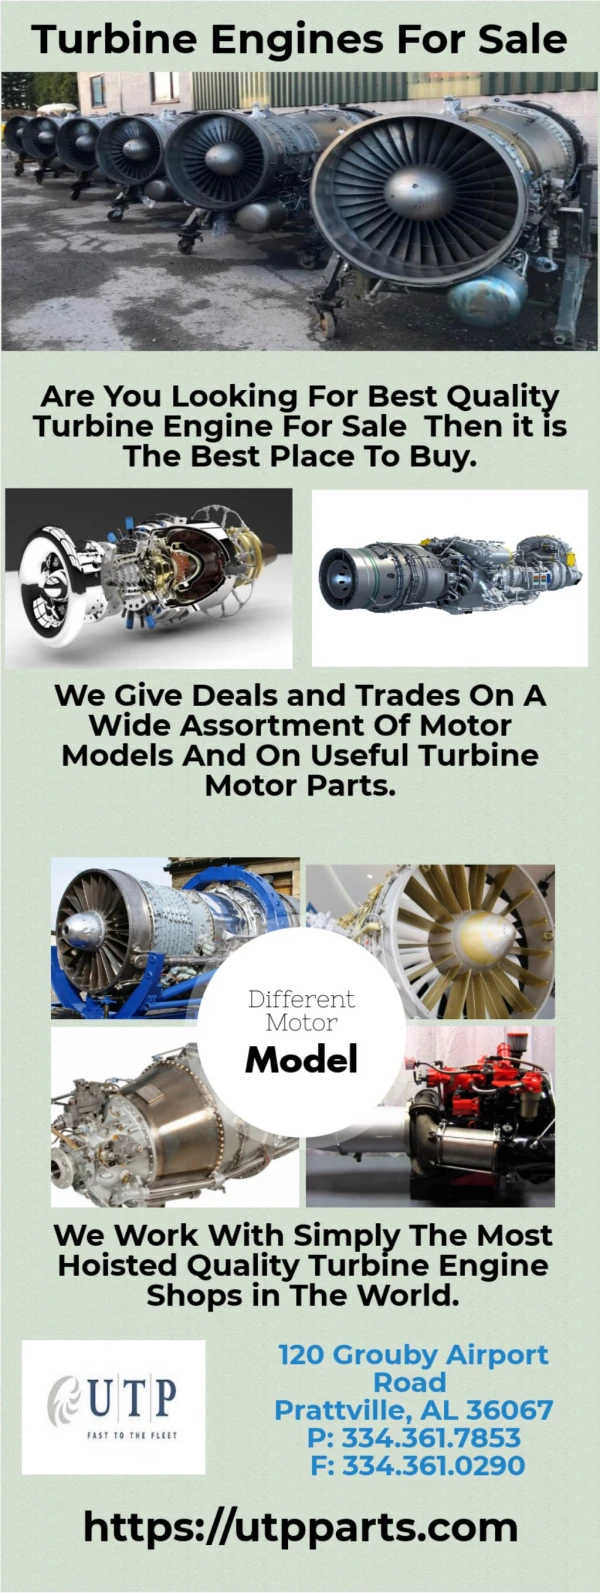 Wide Variety of Turbine Engines for Sale